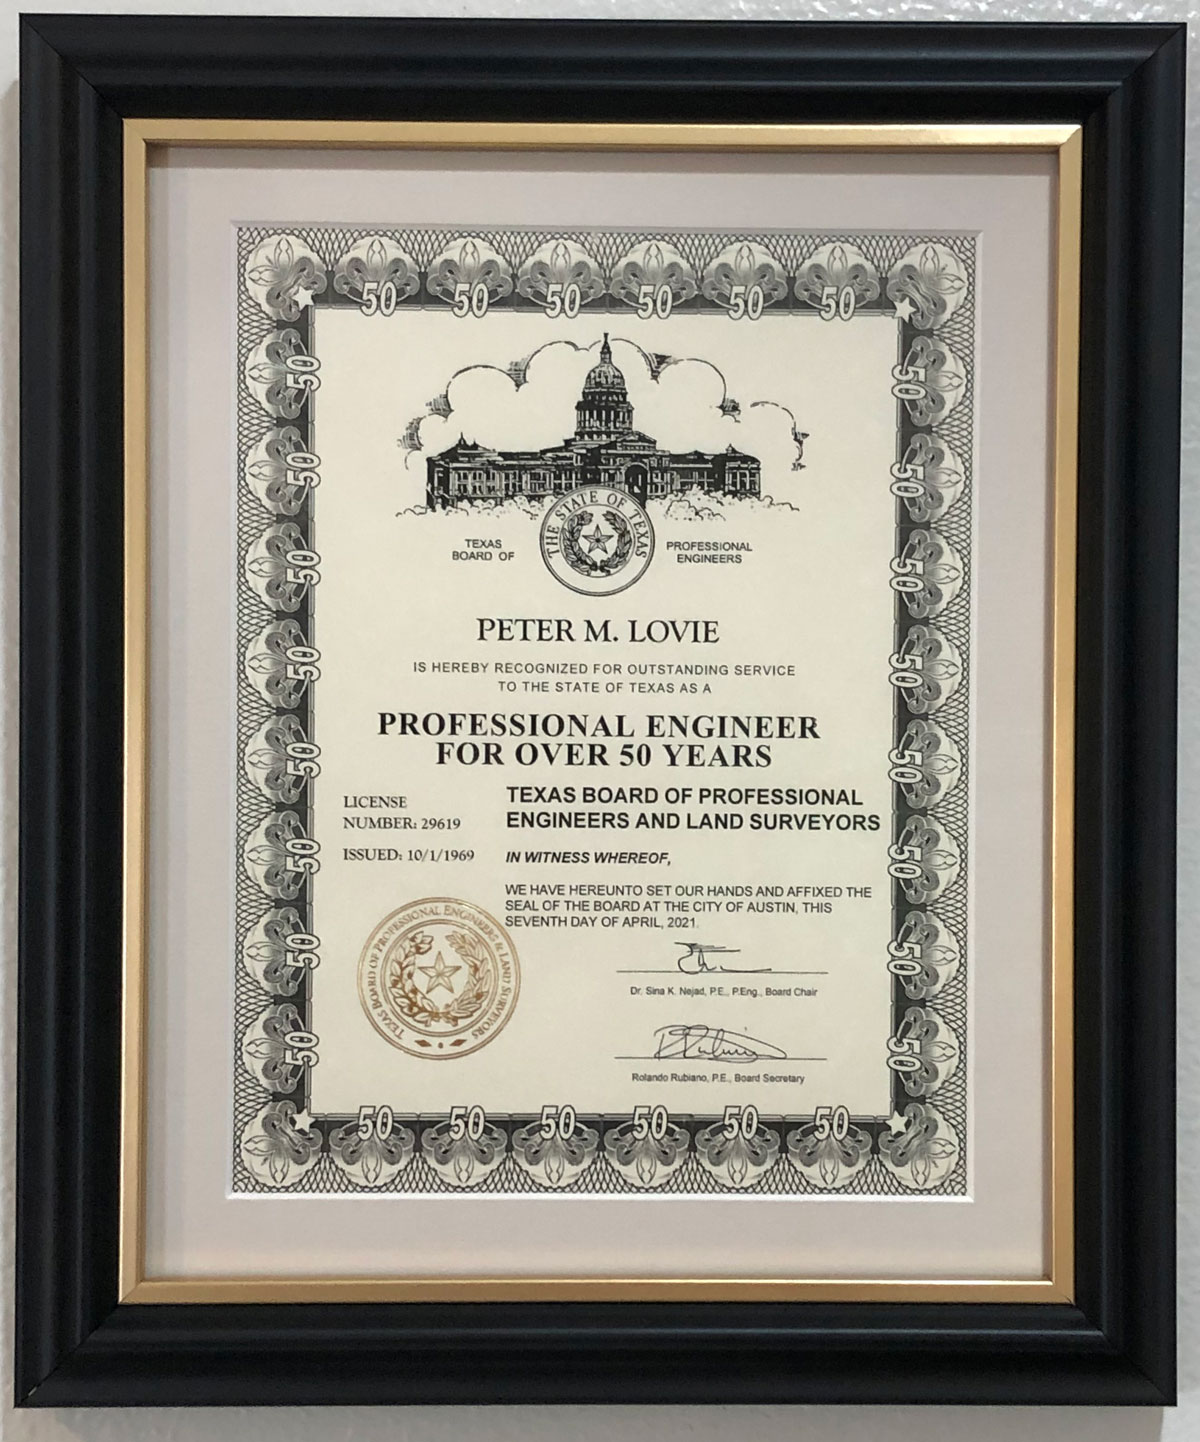 Texas Board of Profesional Engineers and Land Surveyors 50 Years Certificate